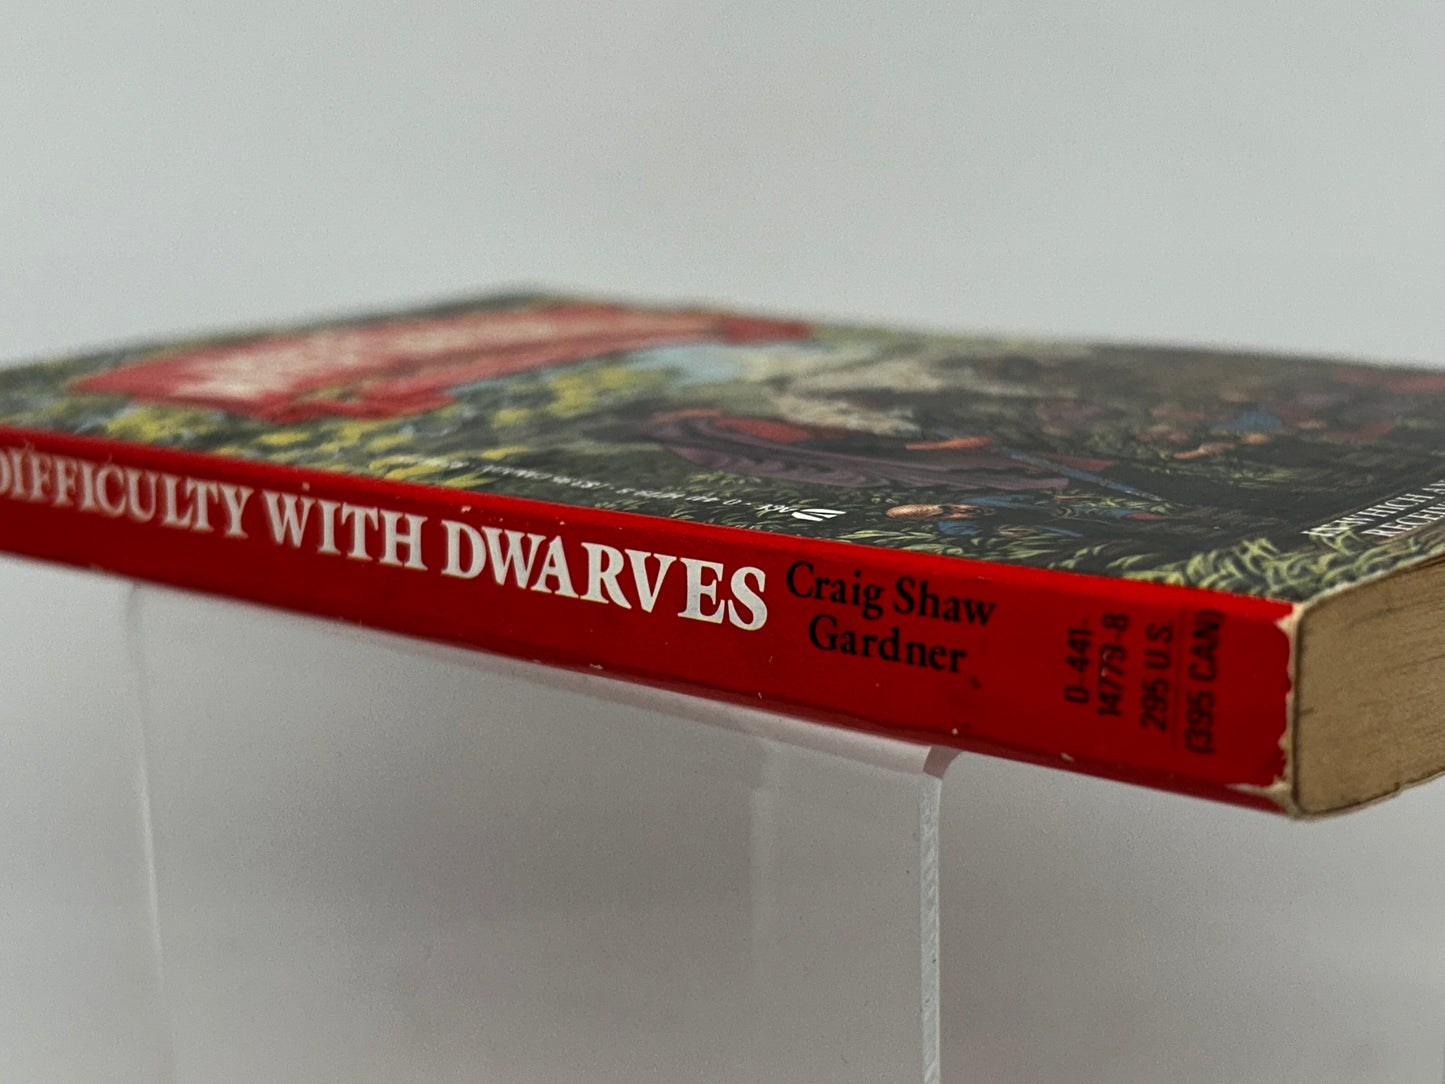 A Difficulty With Dwarves: The Ballad Of Wuntvor ACE Paperback Craig Shaw Gardner SF11